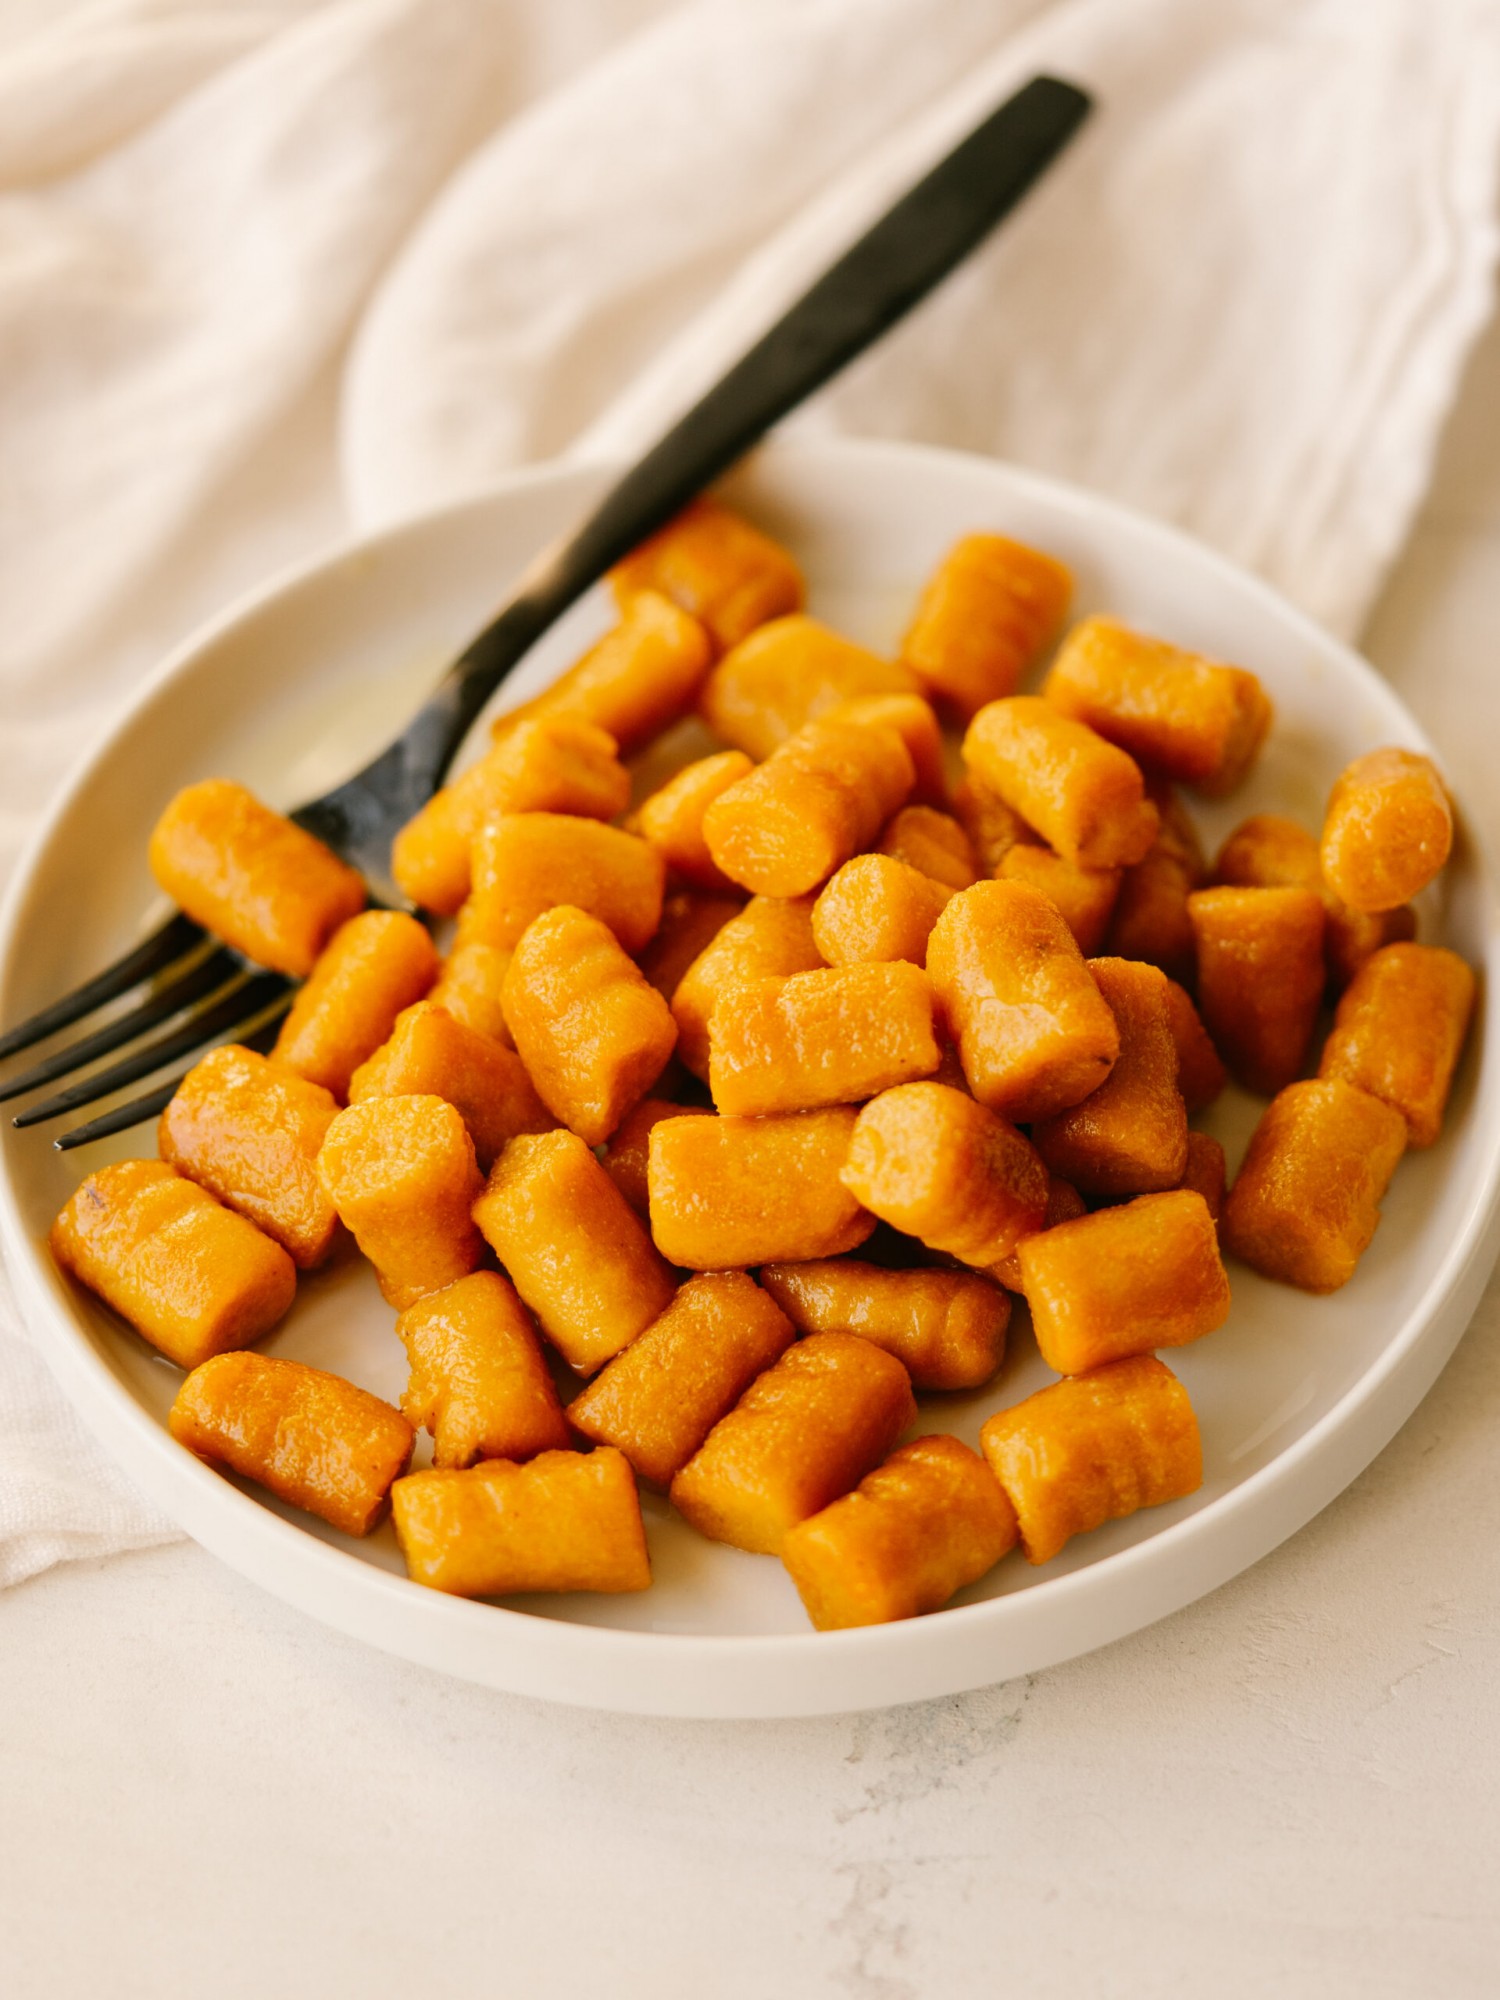 Three quarter view of sweet potato gnocchi on a white plate with a black fork